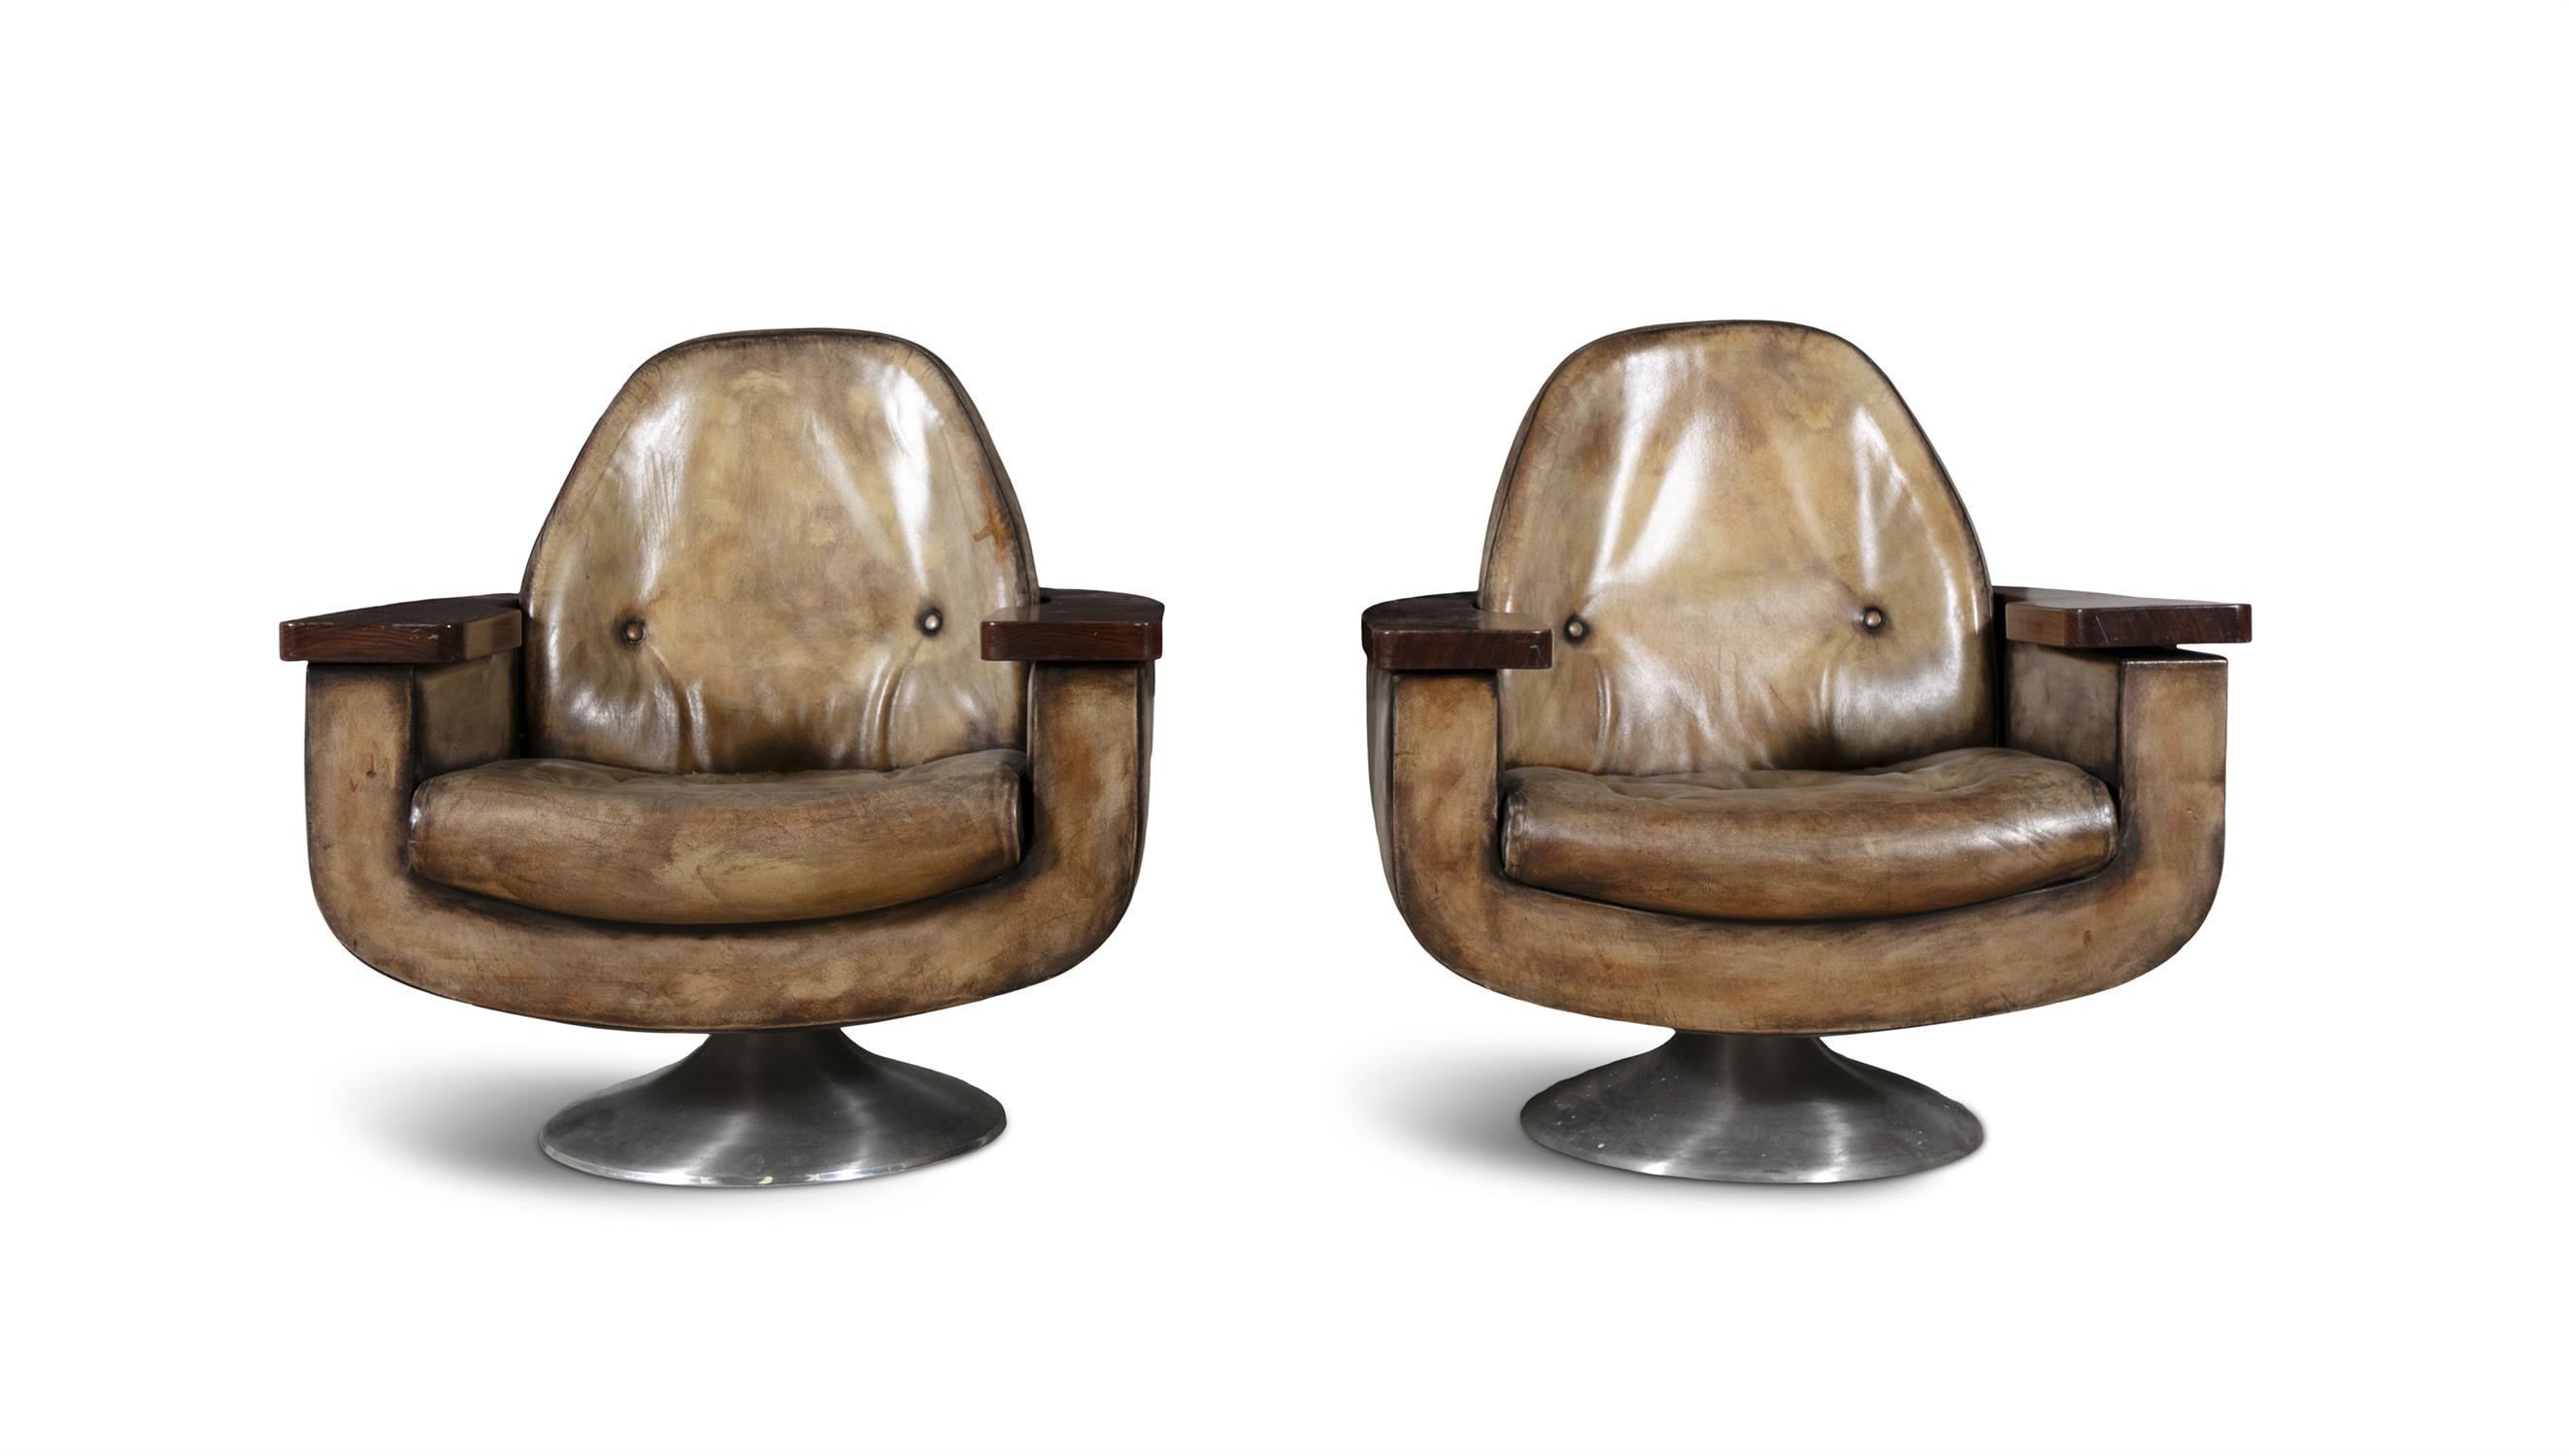 PETER HOYTE A pair of armchairs by Peter Hoyte in rosewood and leather, on a brushed aluminium - Image 2 of 9